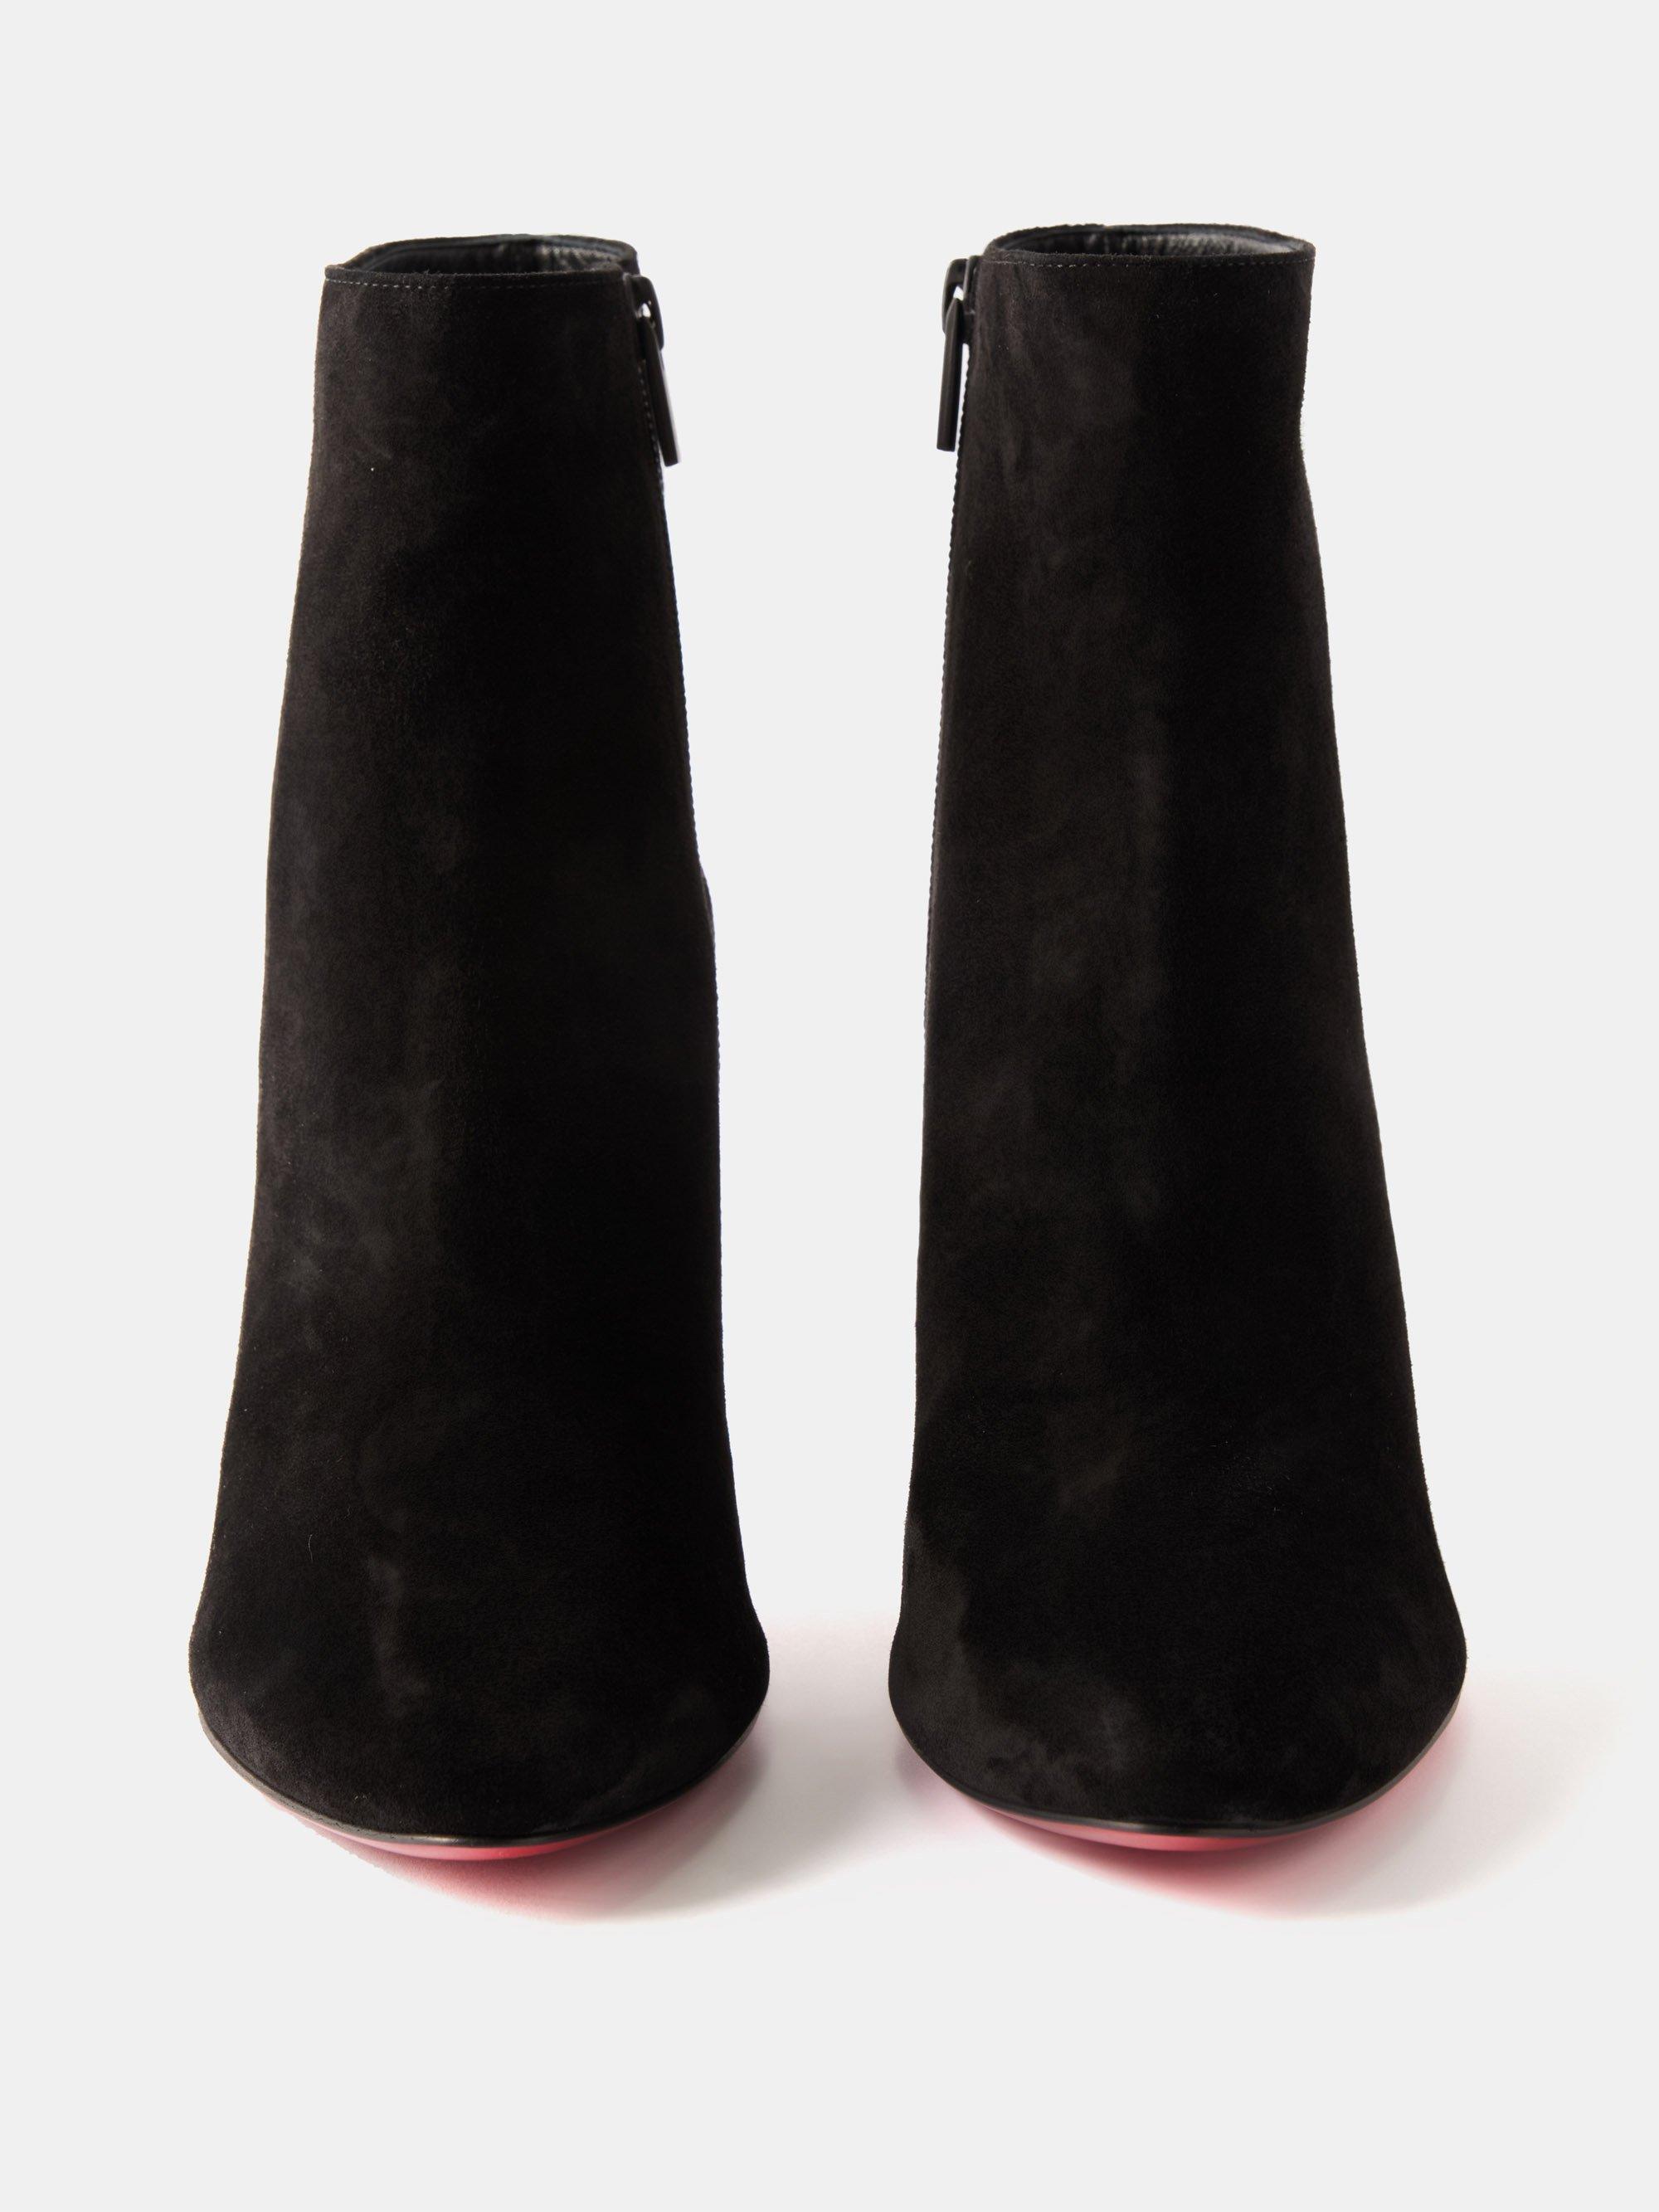 Christian Louboutin So Eleanor Ankle Boots 85 mm in Black